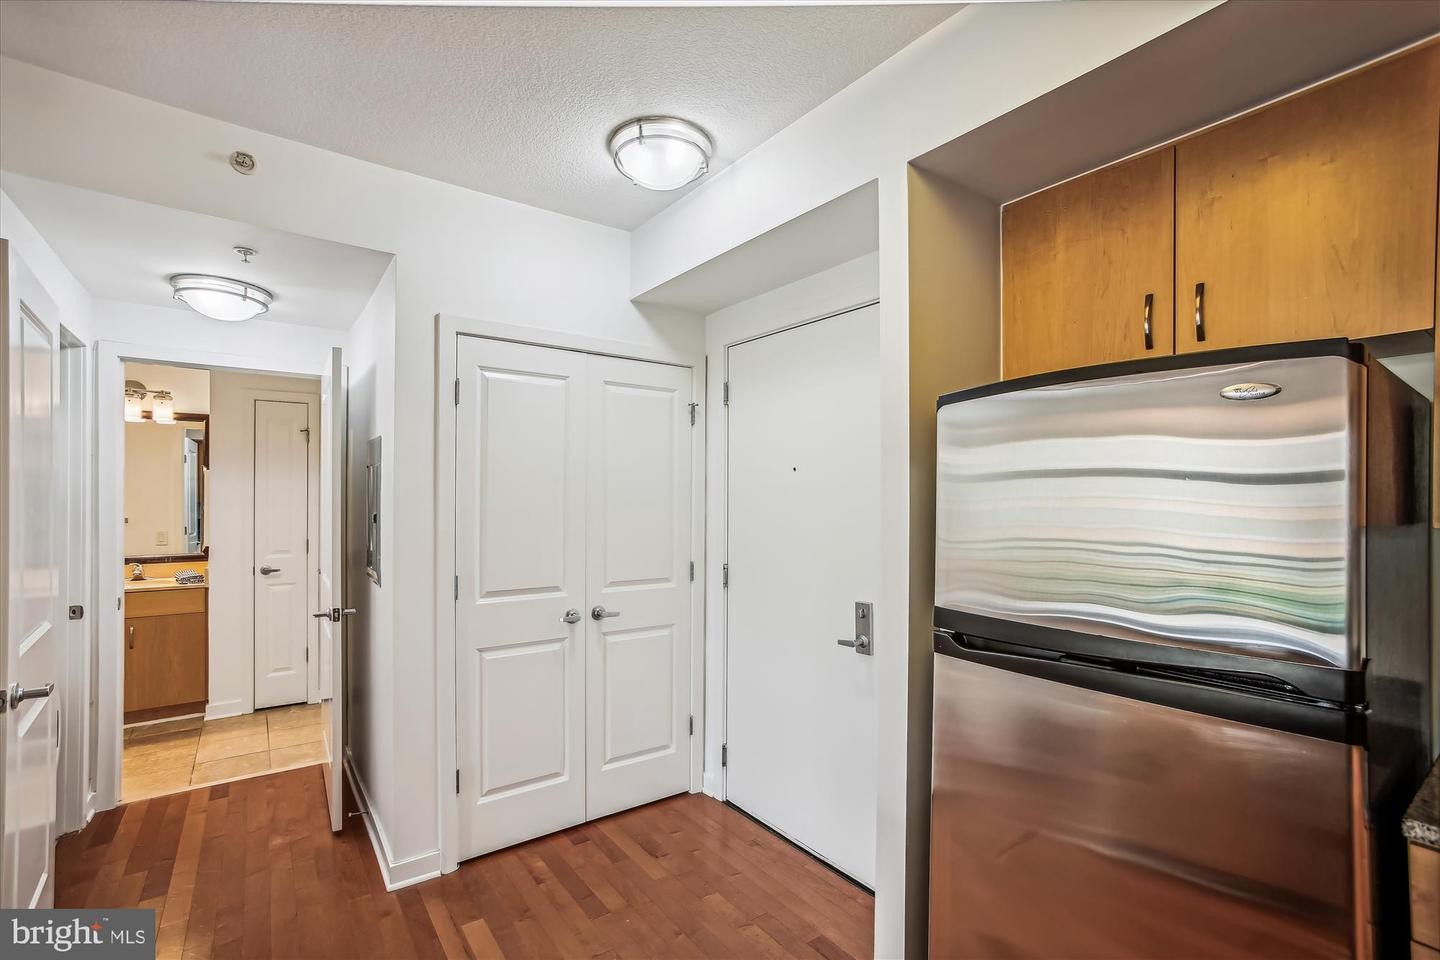 14. 475 K St NW 